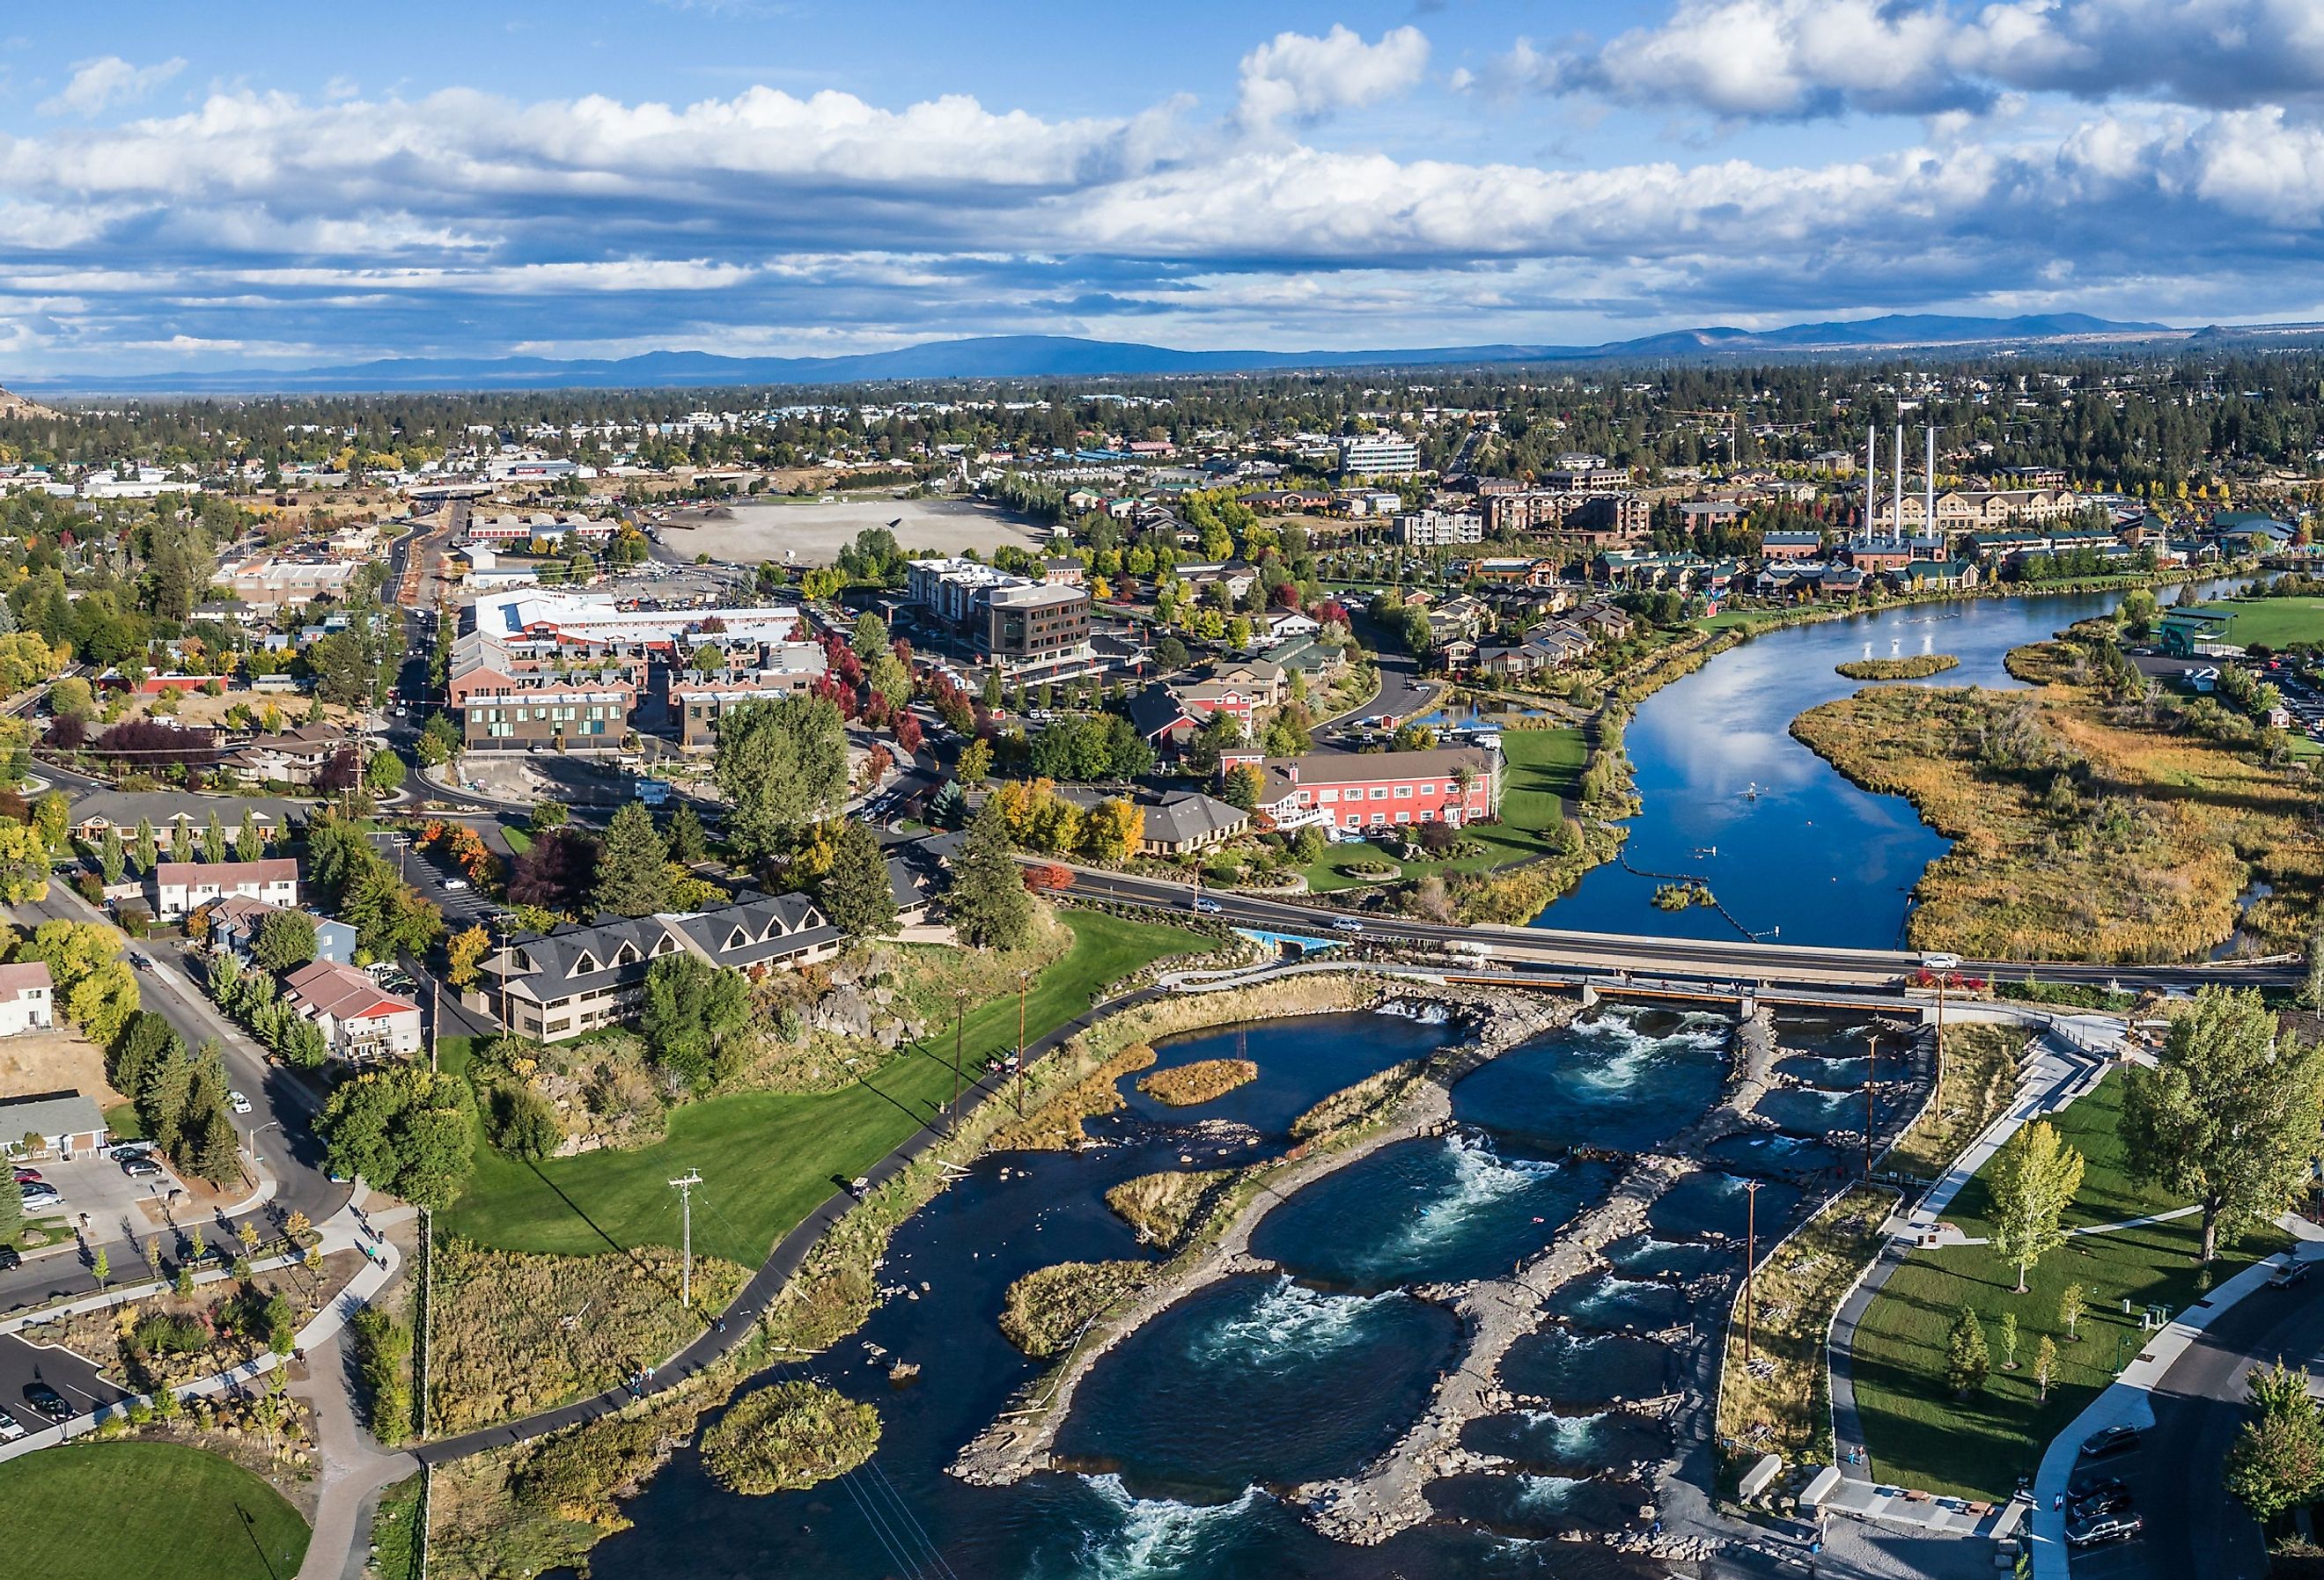 An aerial view of the Bend, Oregon Whitewater Park. Image credit Mike Albright Photography via Shutterstock